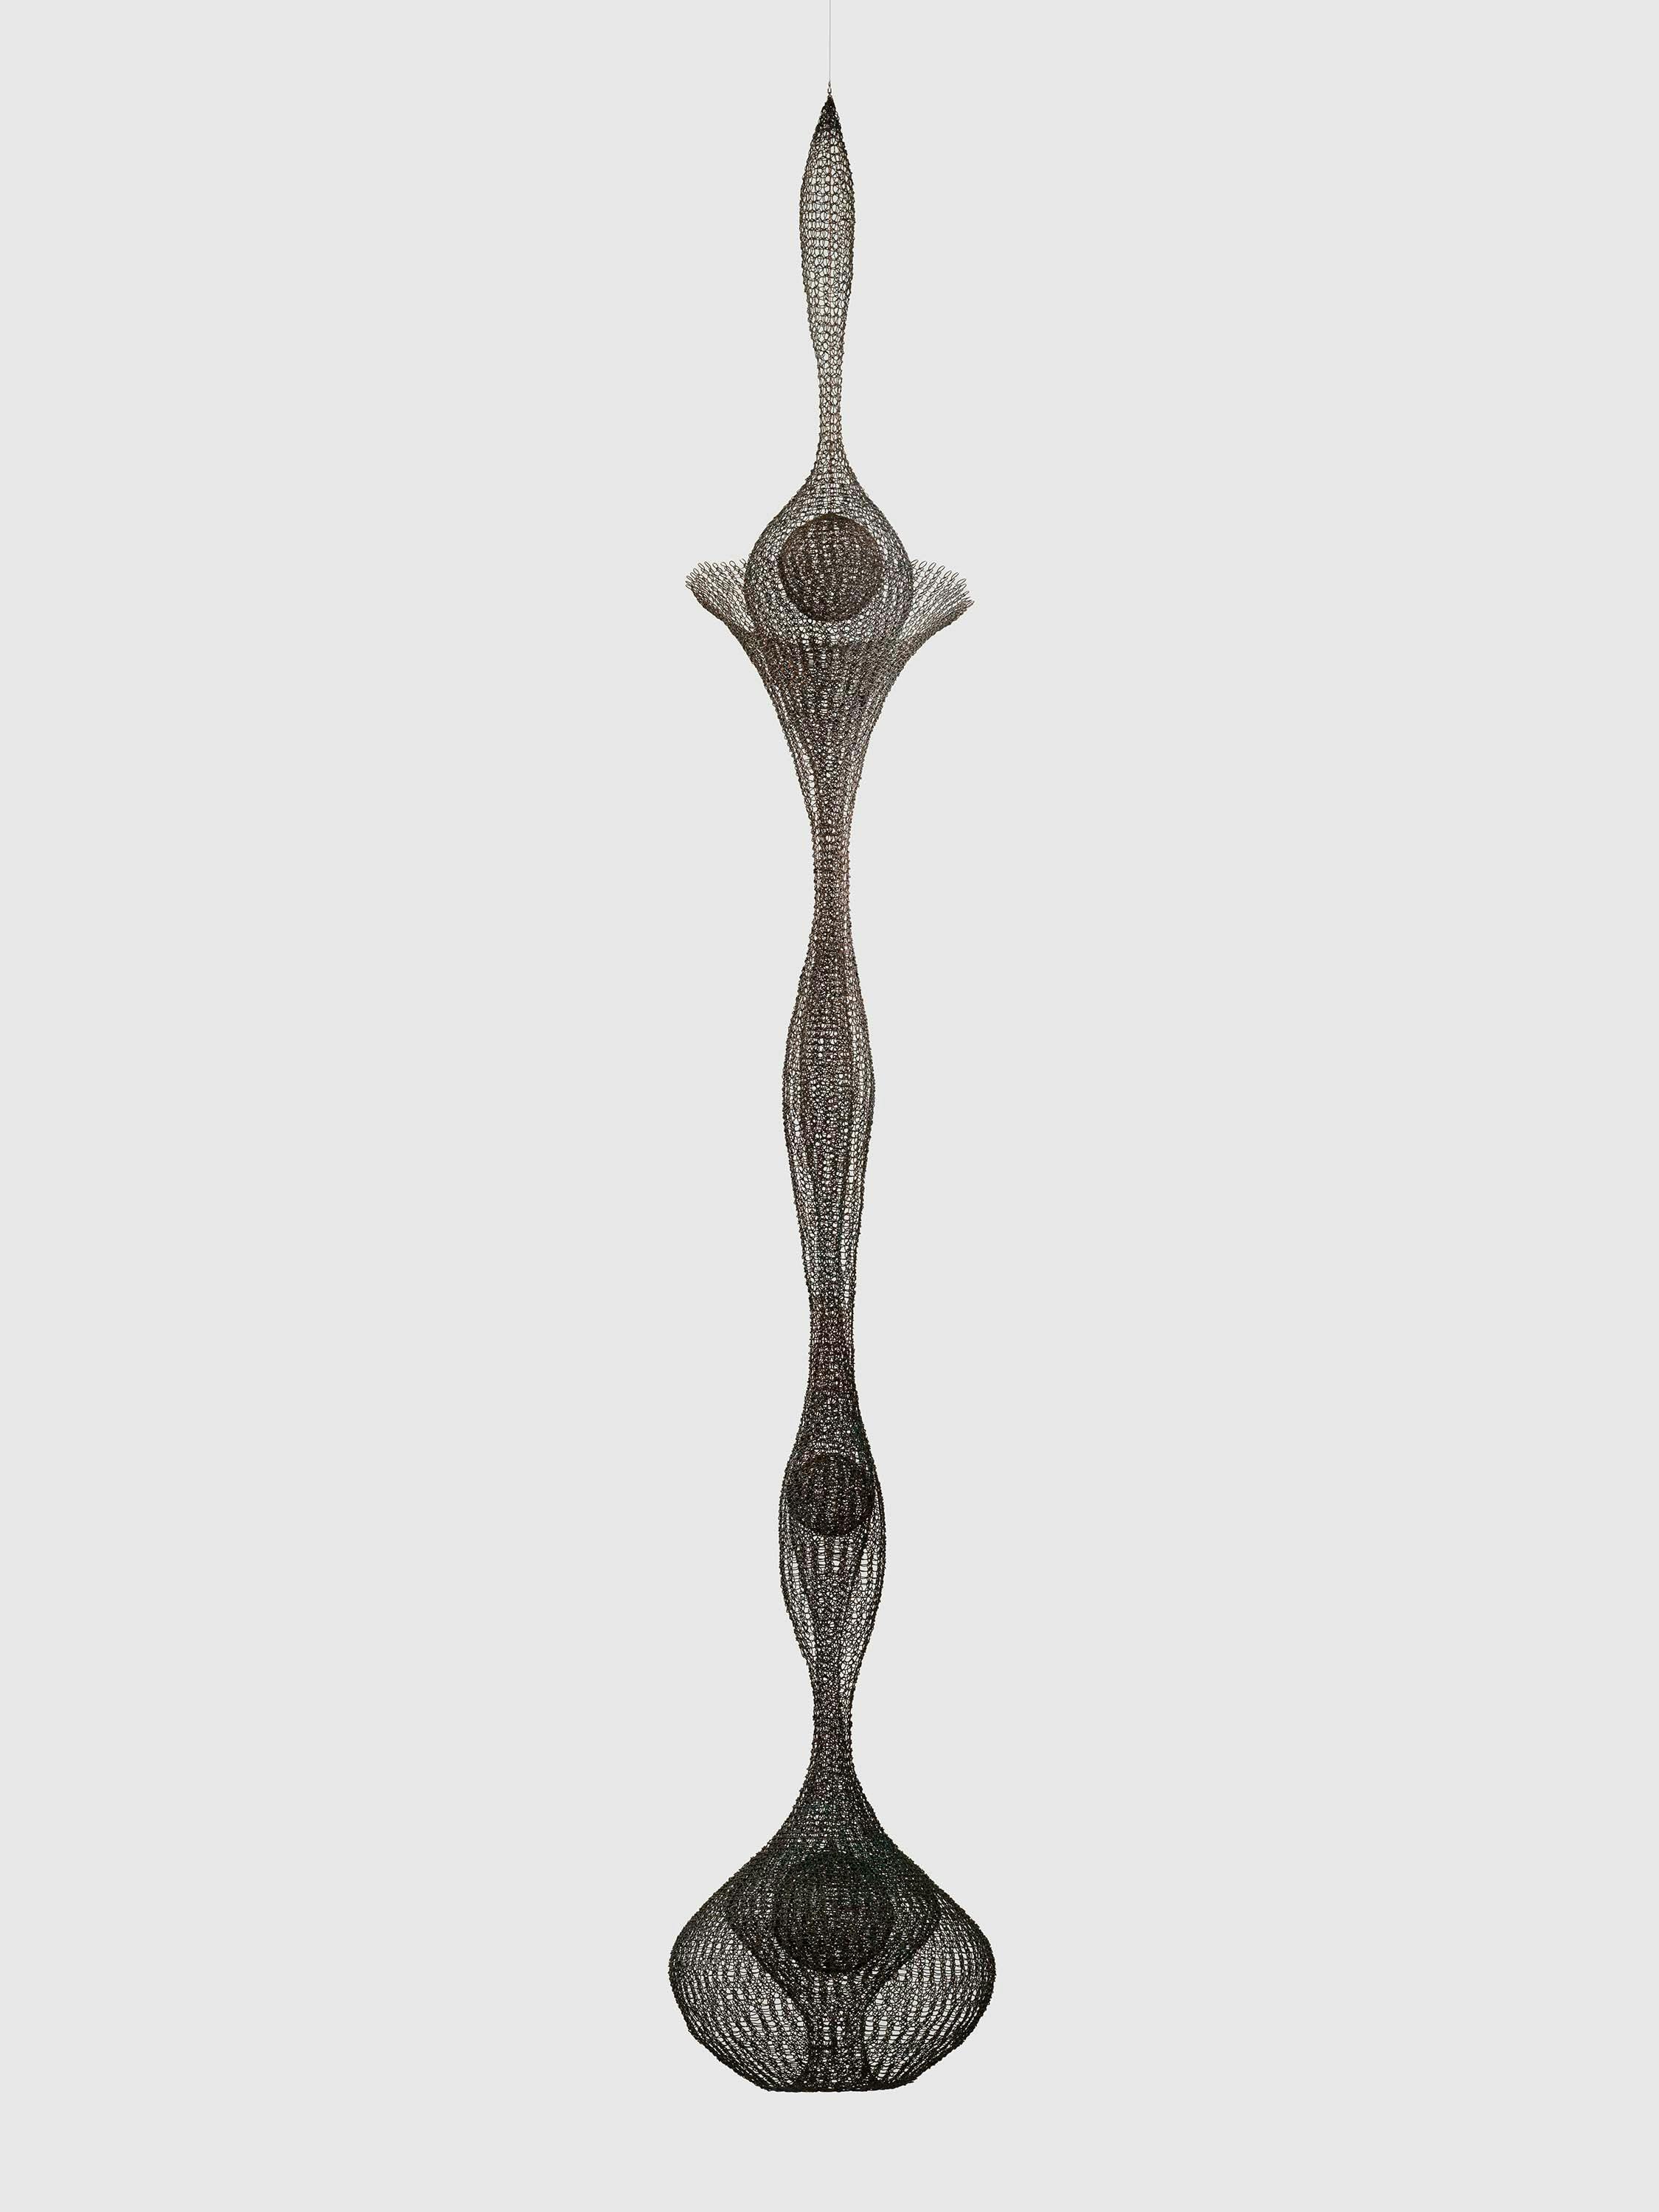 A sculpture by Ruth Asawa, titled Untitled (S.765, Hanging Five-Lobed Continuous Form Within a Form with a Large Open Collar and Three Interior Spheres), circa 1952 to 1953.